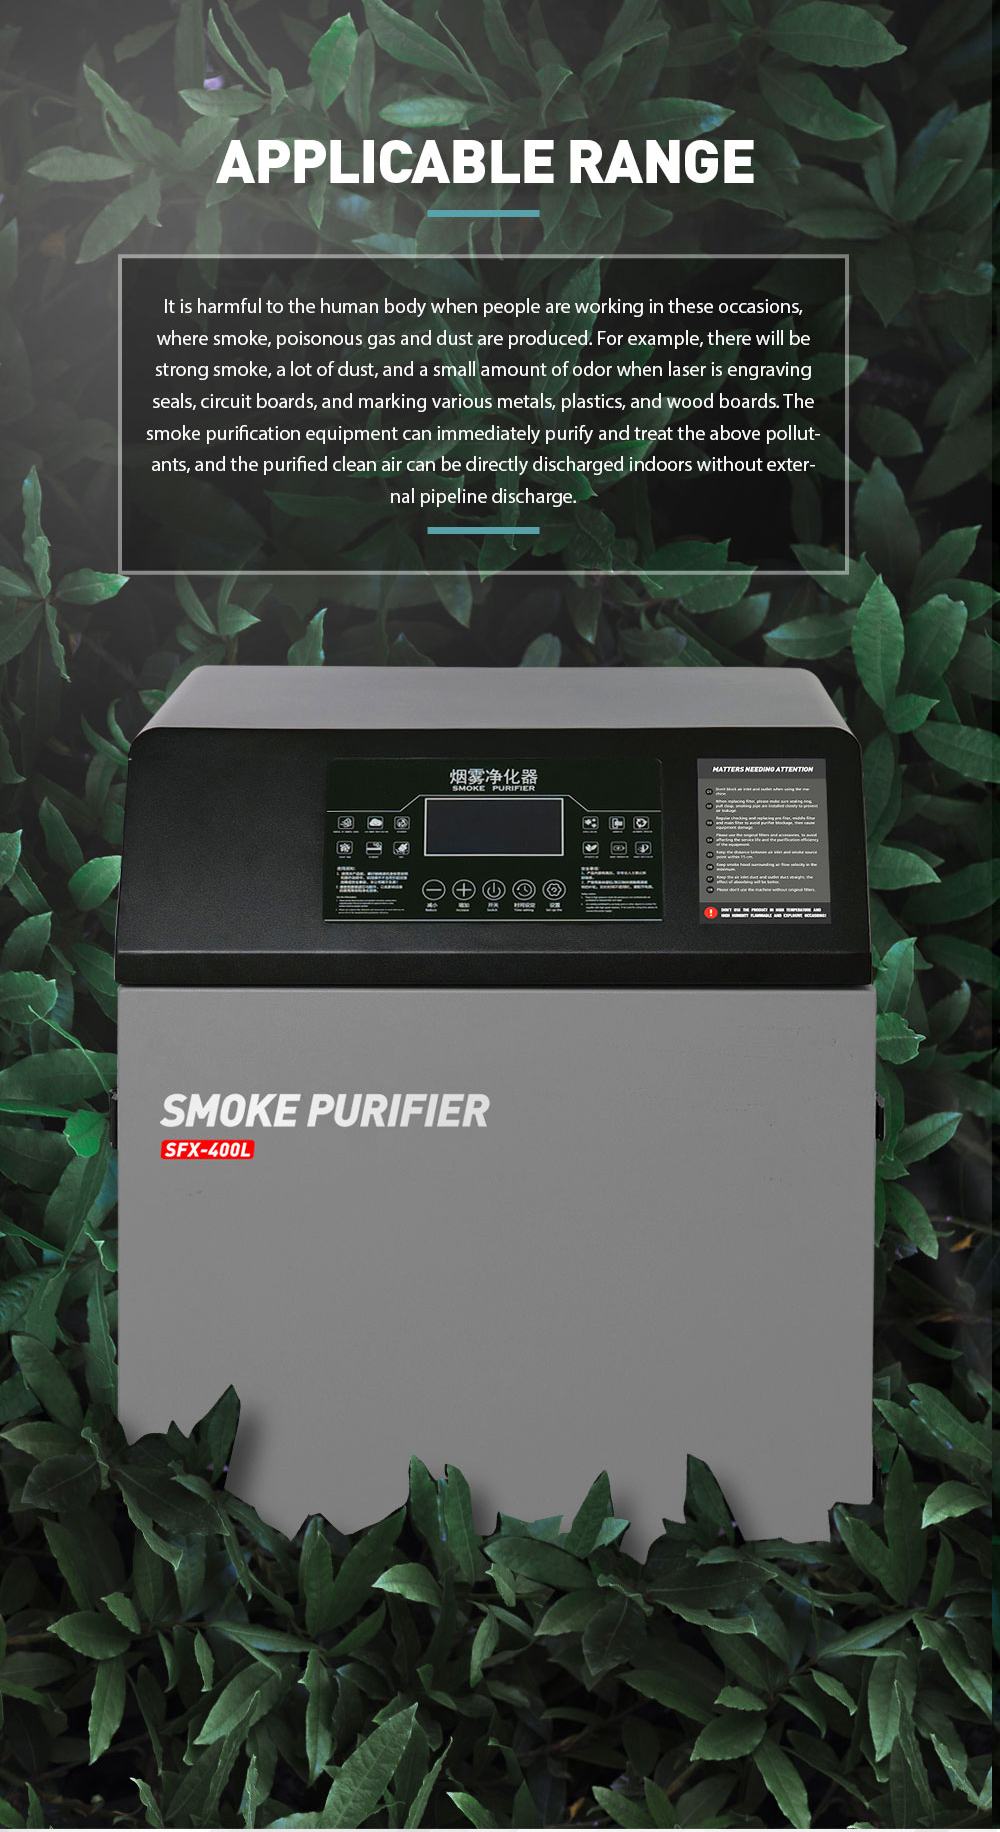 SFX Solder Fumes Purifier with 8 Layer Dust Bag SFX-400L Laser Fume Extractor Solder Welding Smoke Absorber Filter  SFX Solder Fumes Purifier with 8 Layer Dust Bag SFX-400L Laser Fume Extractor Solder Welding Smoke Absorber Filter  Solder Fumes Purifier,Laser Fume Extractor,Solder Welding Smoke Absorber Filter,sfx laser,180w co2 laser cutter